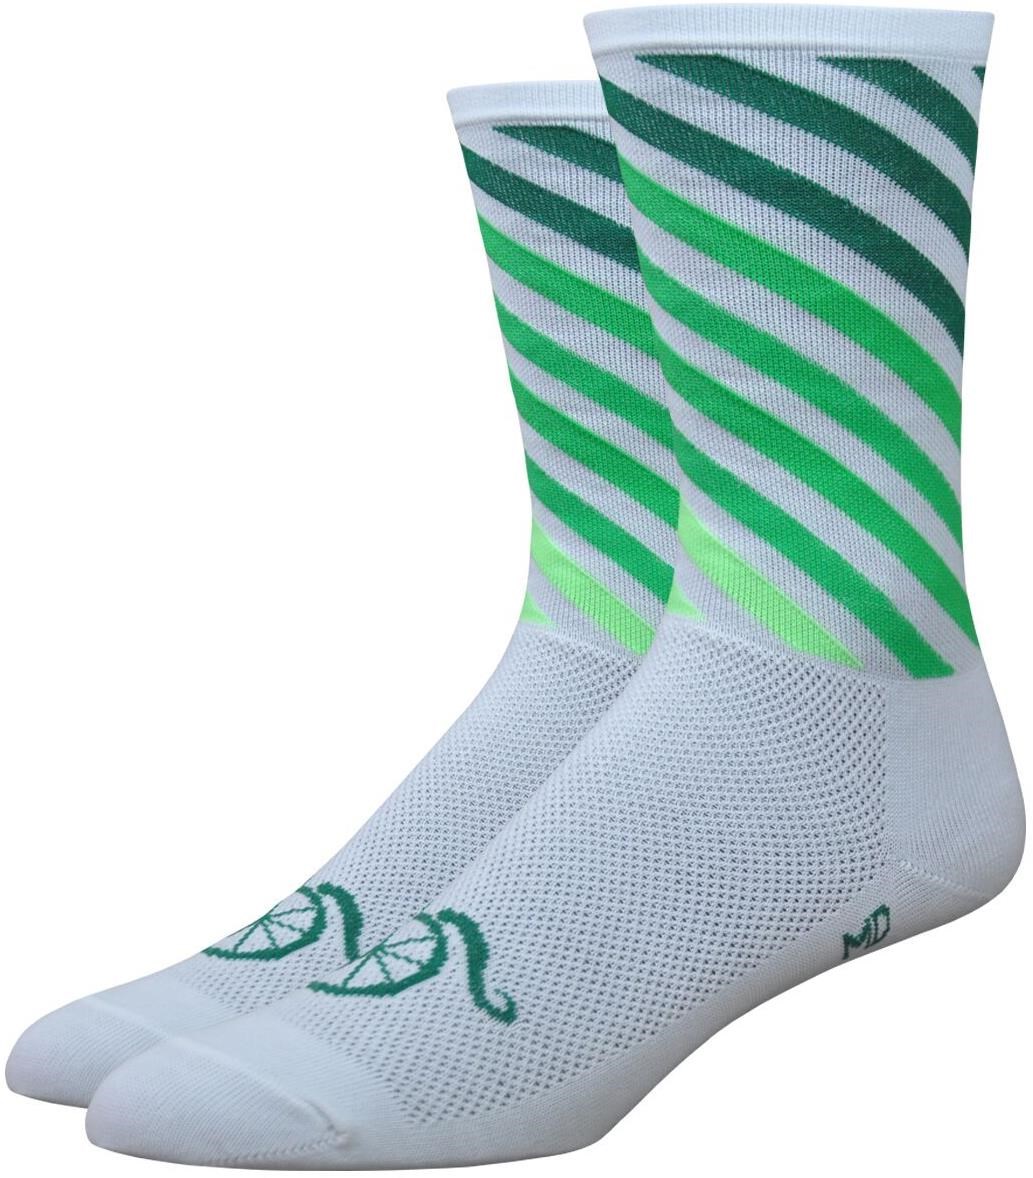 Defeet Aireator 6" Decade Pro Socks product image